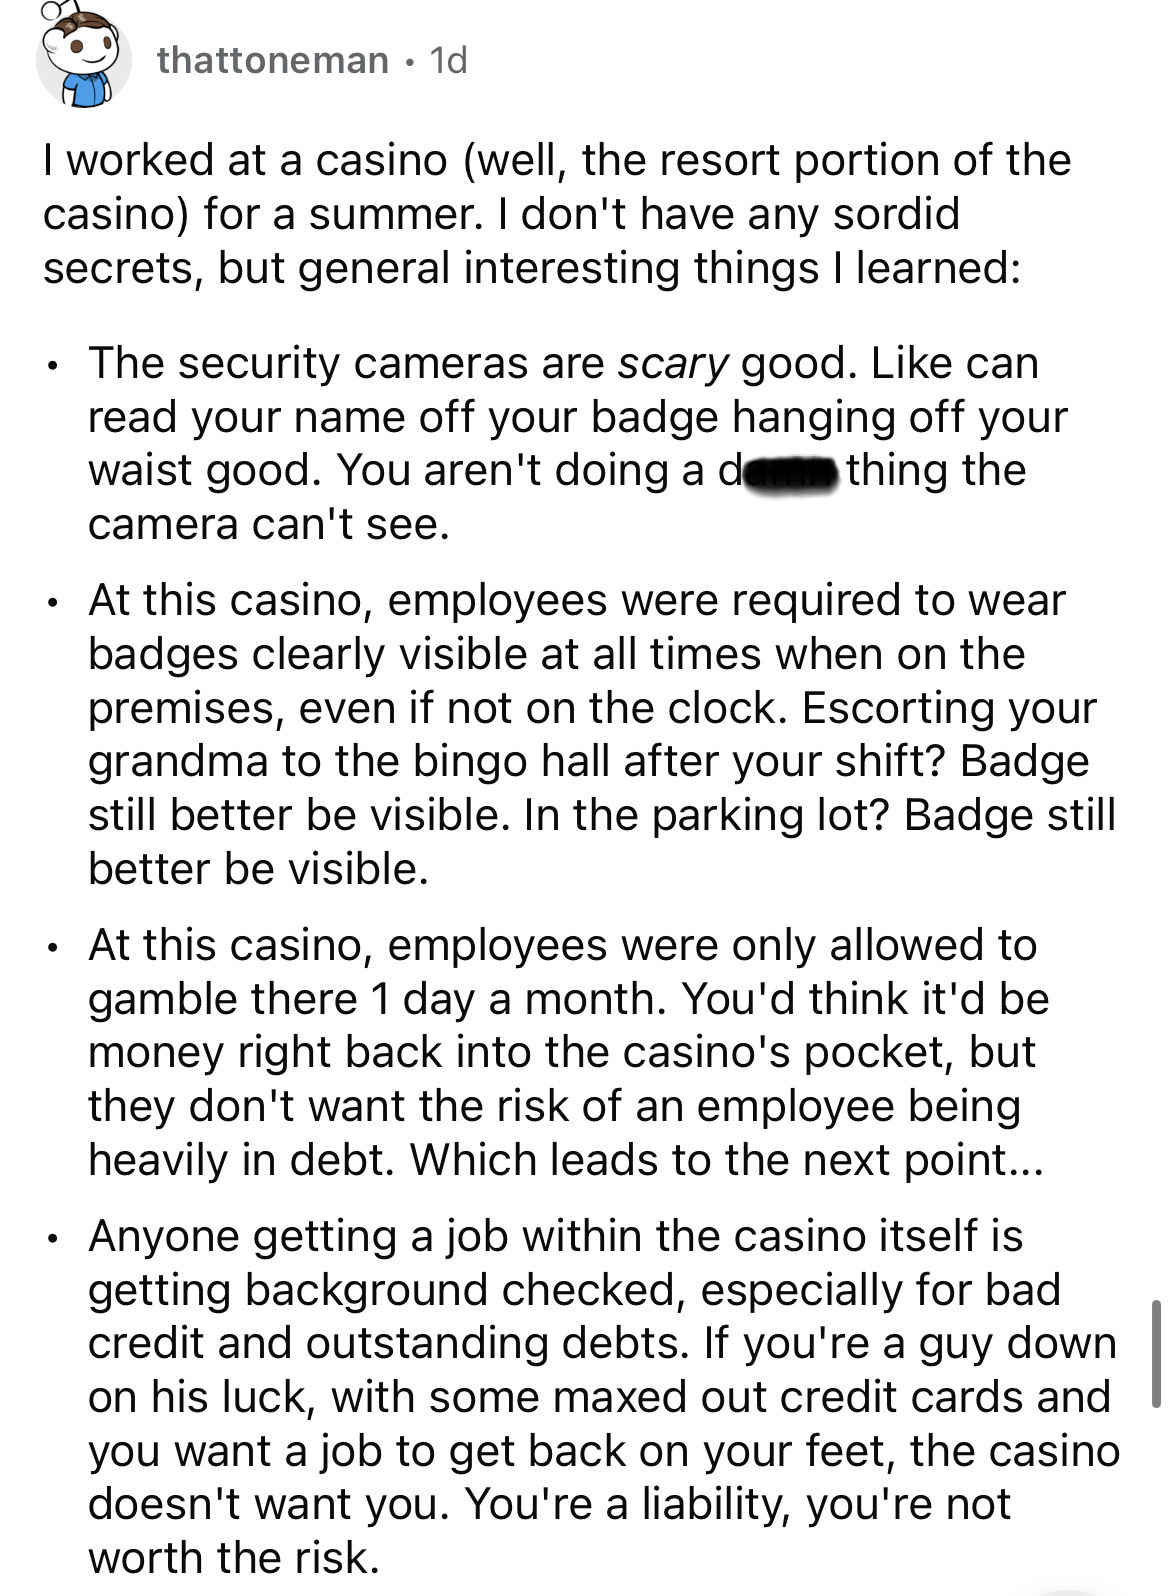 document - thattoneman. 1d I worked at a casino well, the resort portion of the casino for a summer. I don't have any sordid secrets, but general interesting things I learned . The security cameras are scary good. can read your name off your badge hanging